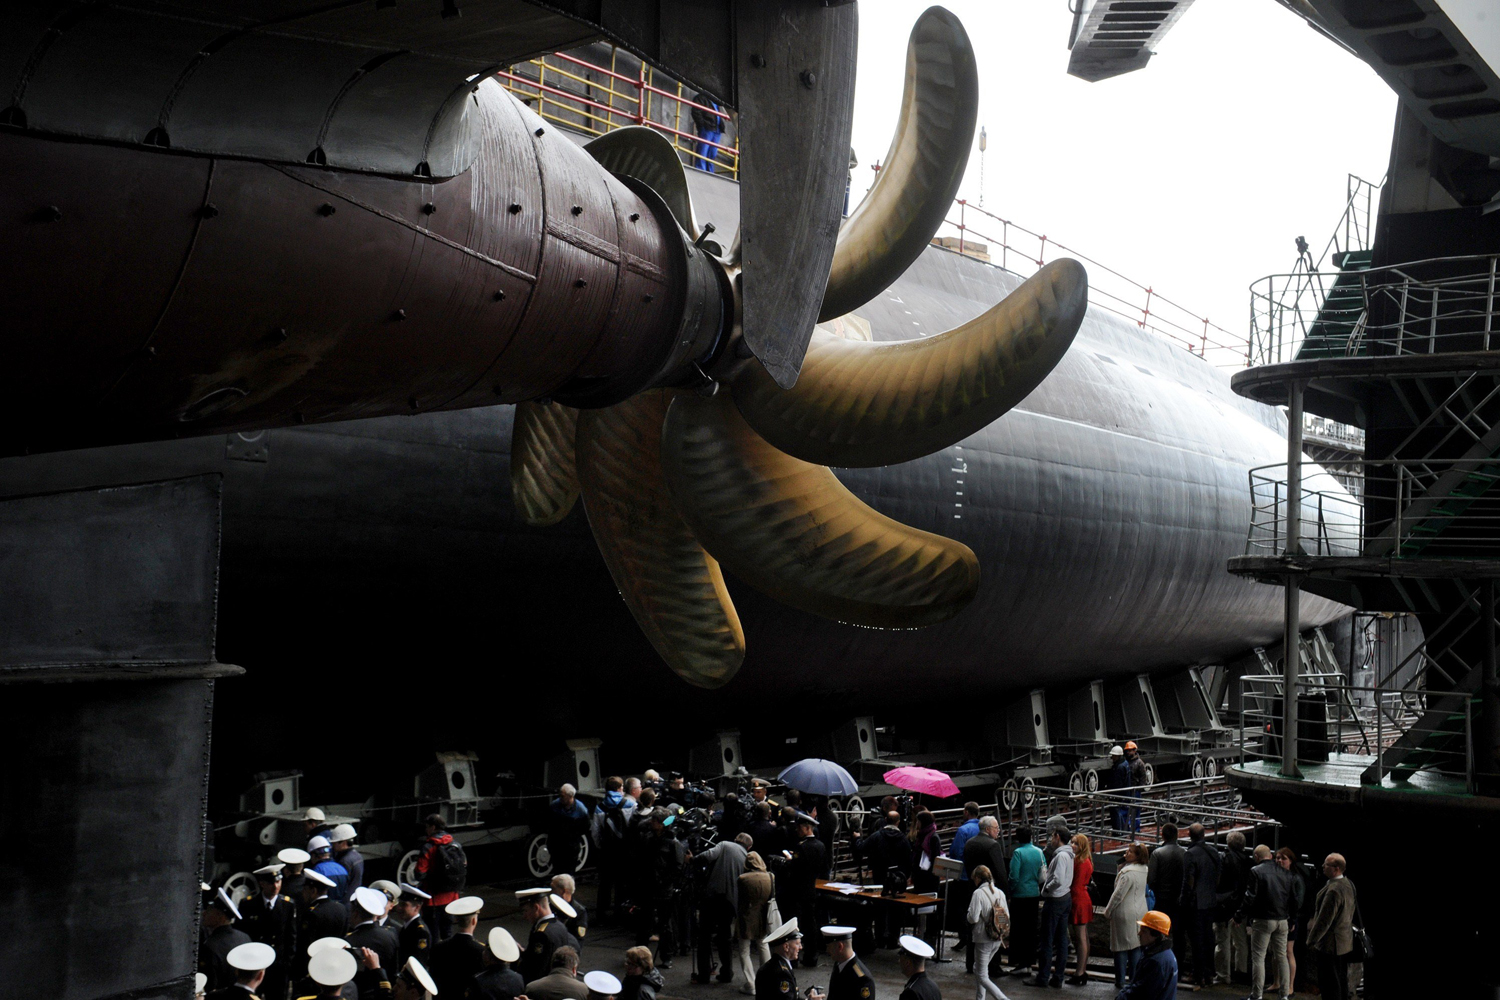 Jun. 26, 2014. Russia's Navy officers, officials and workers attend a ceremony of launching the Rostov-on-Don Russian diesel-electric torpedo submarine at the Admiralteiskiye verfy shipyard in St. Petersburg, Russia.